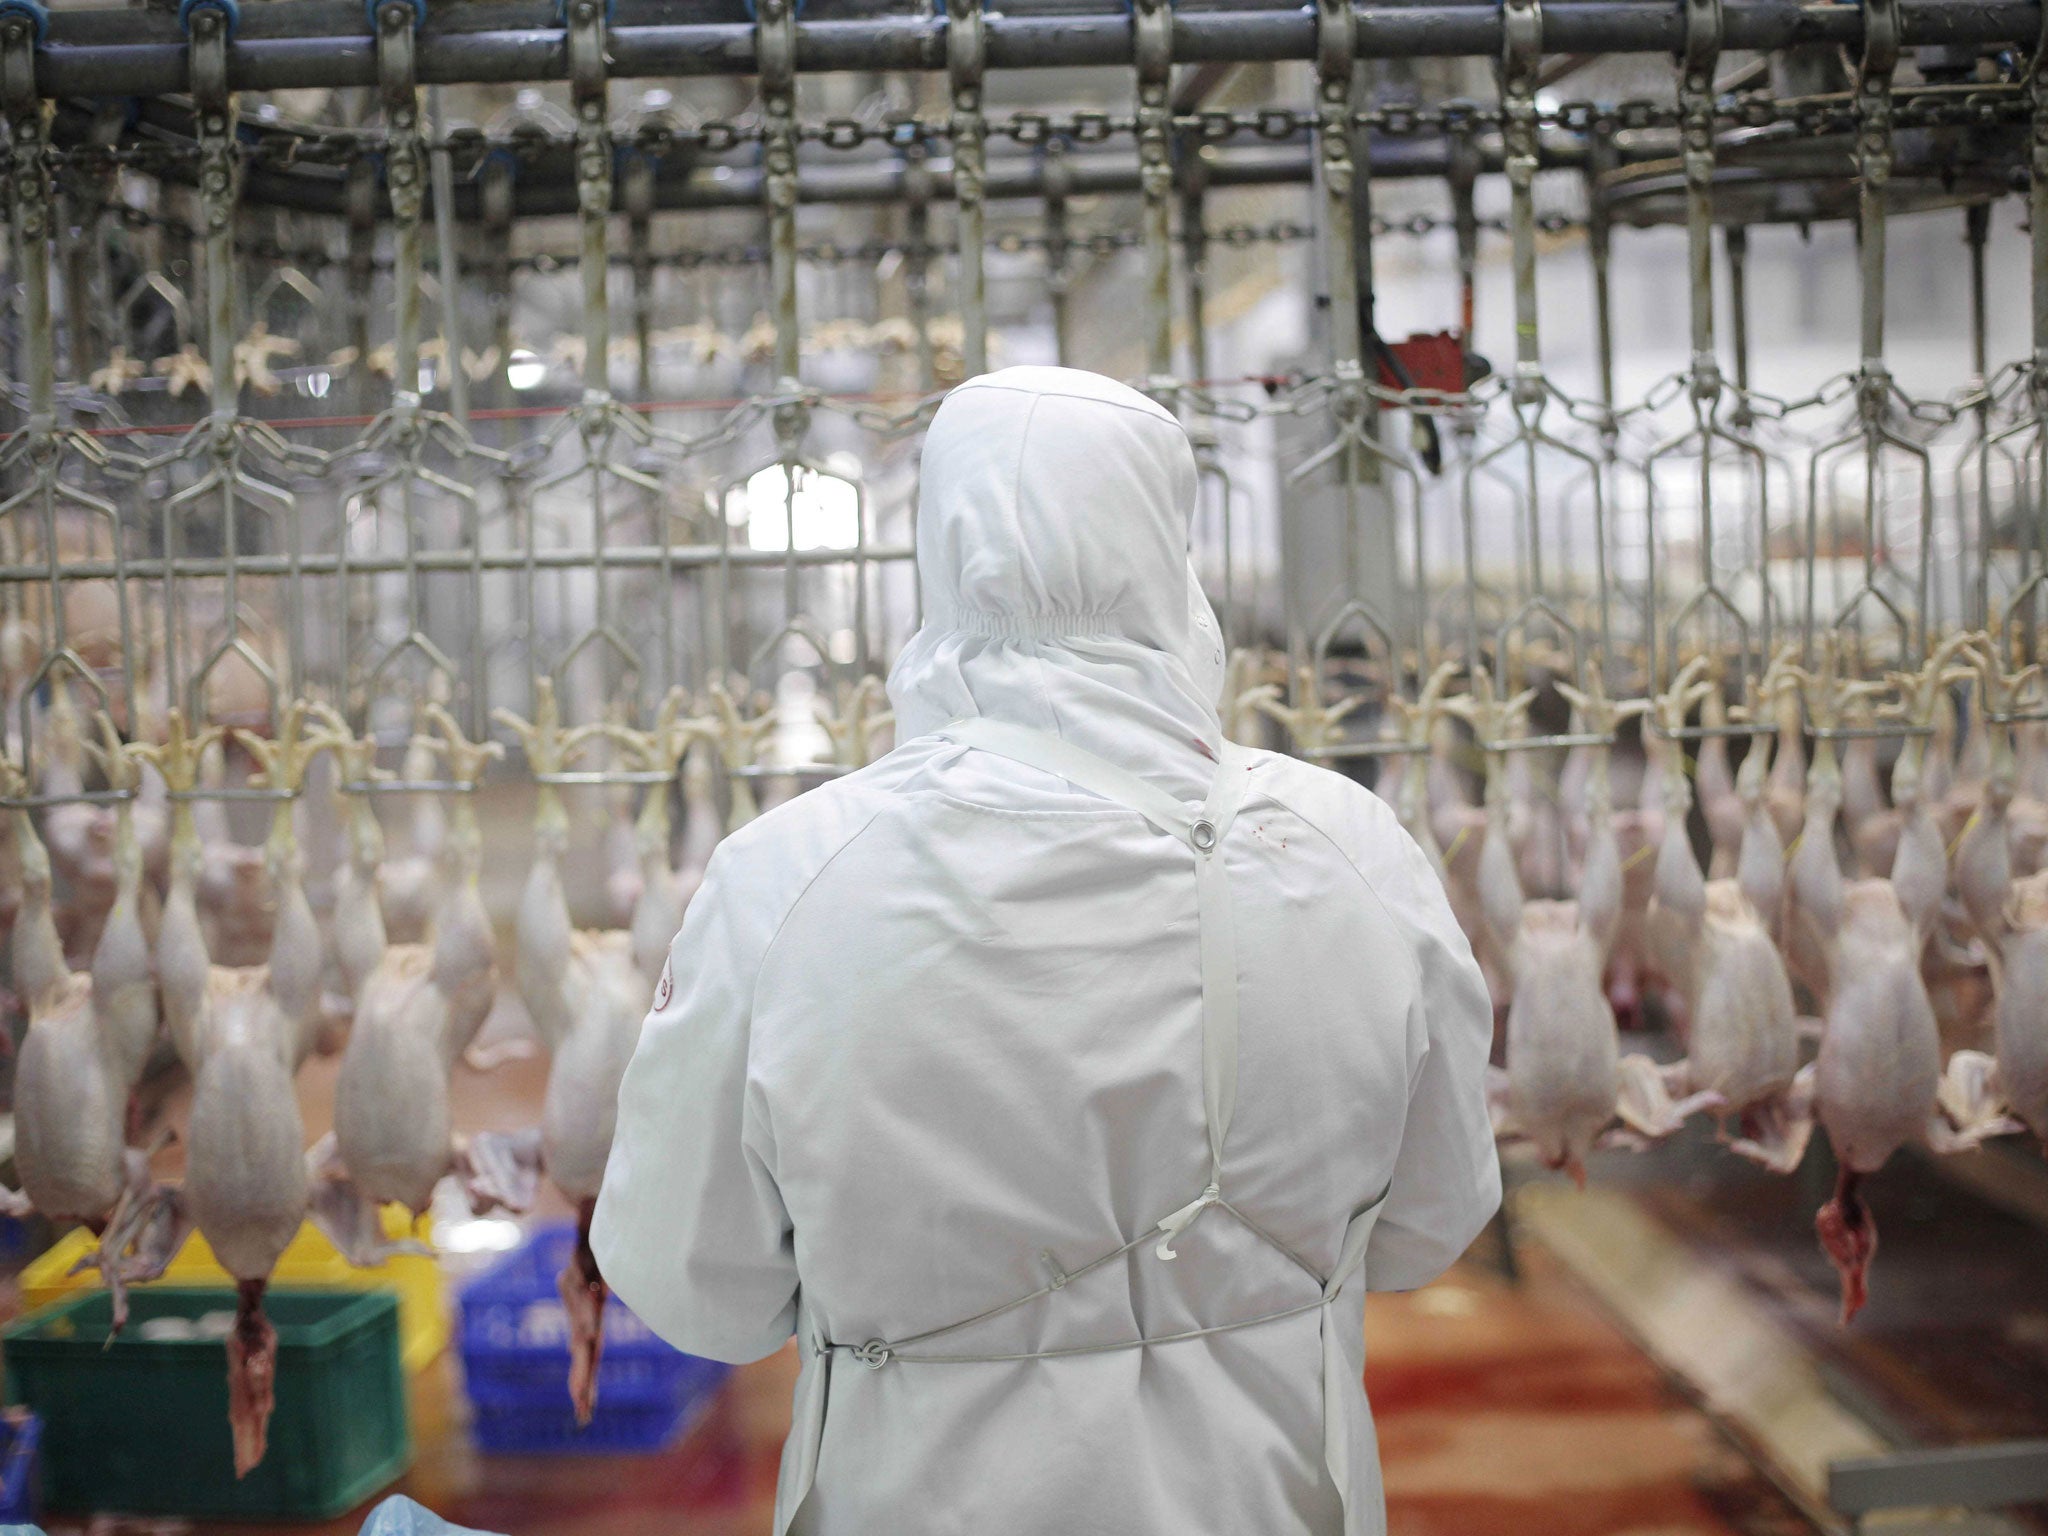 File image showing chickens at a halal abattoir in France